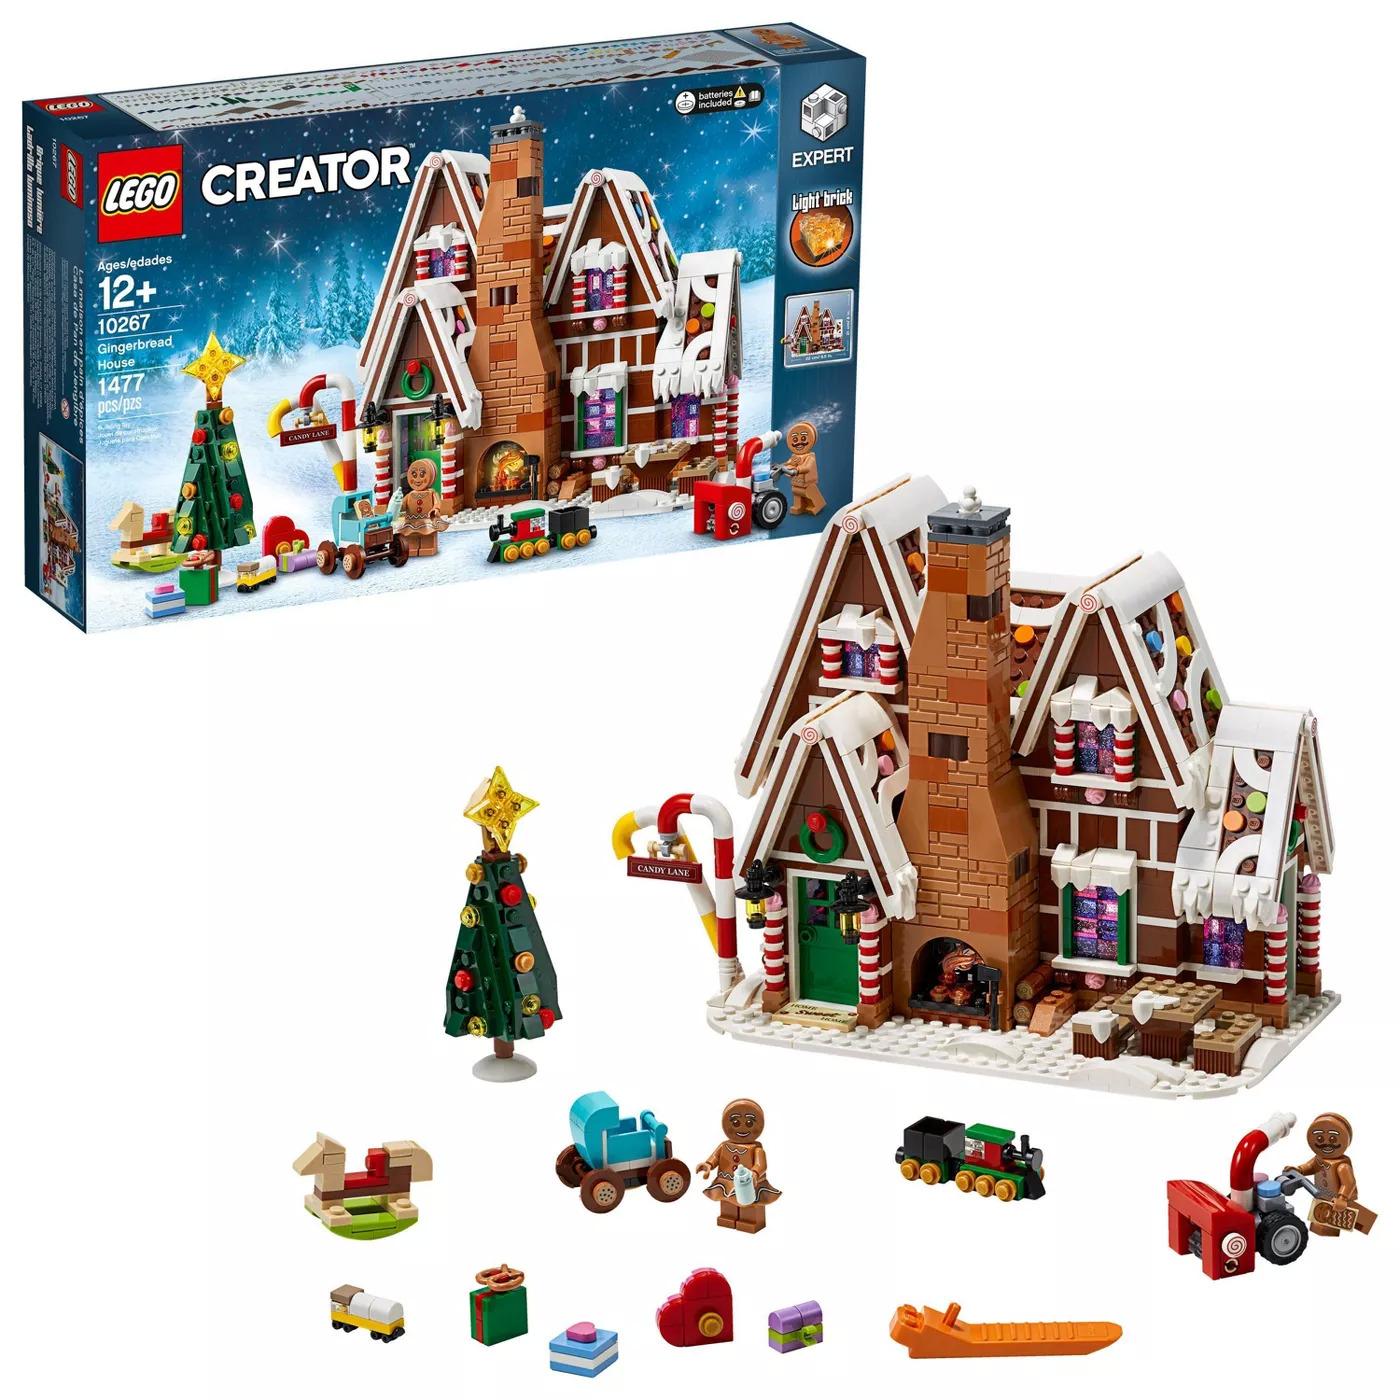 1477-Piece LEGO Creator Expert Gingerbread House Building Kit for $99.99 Shipped